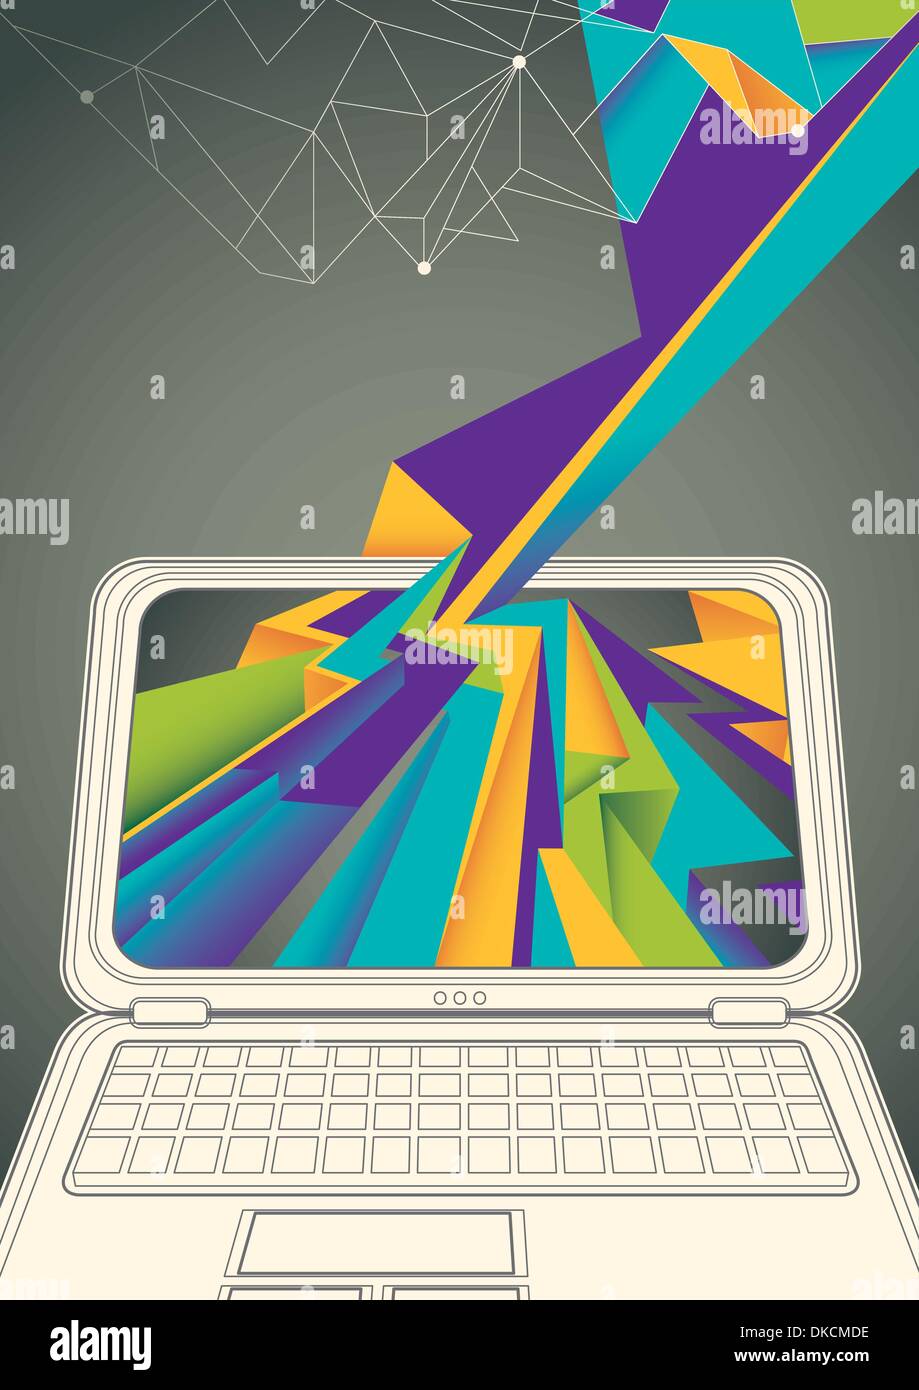 Technology poster with laptop Stock Vector